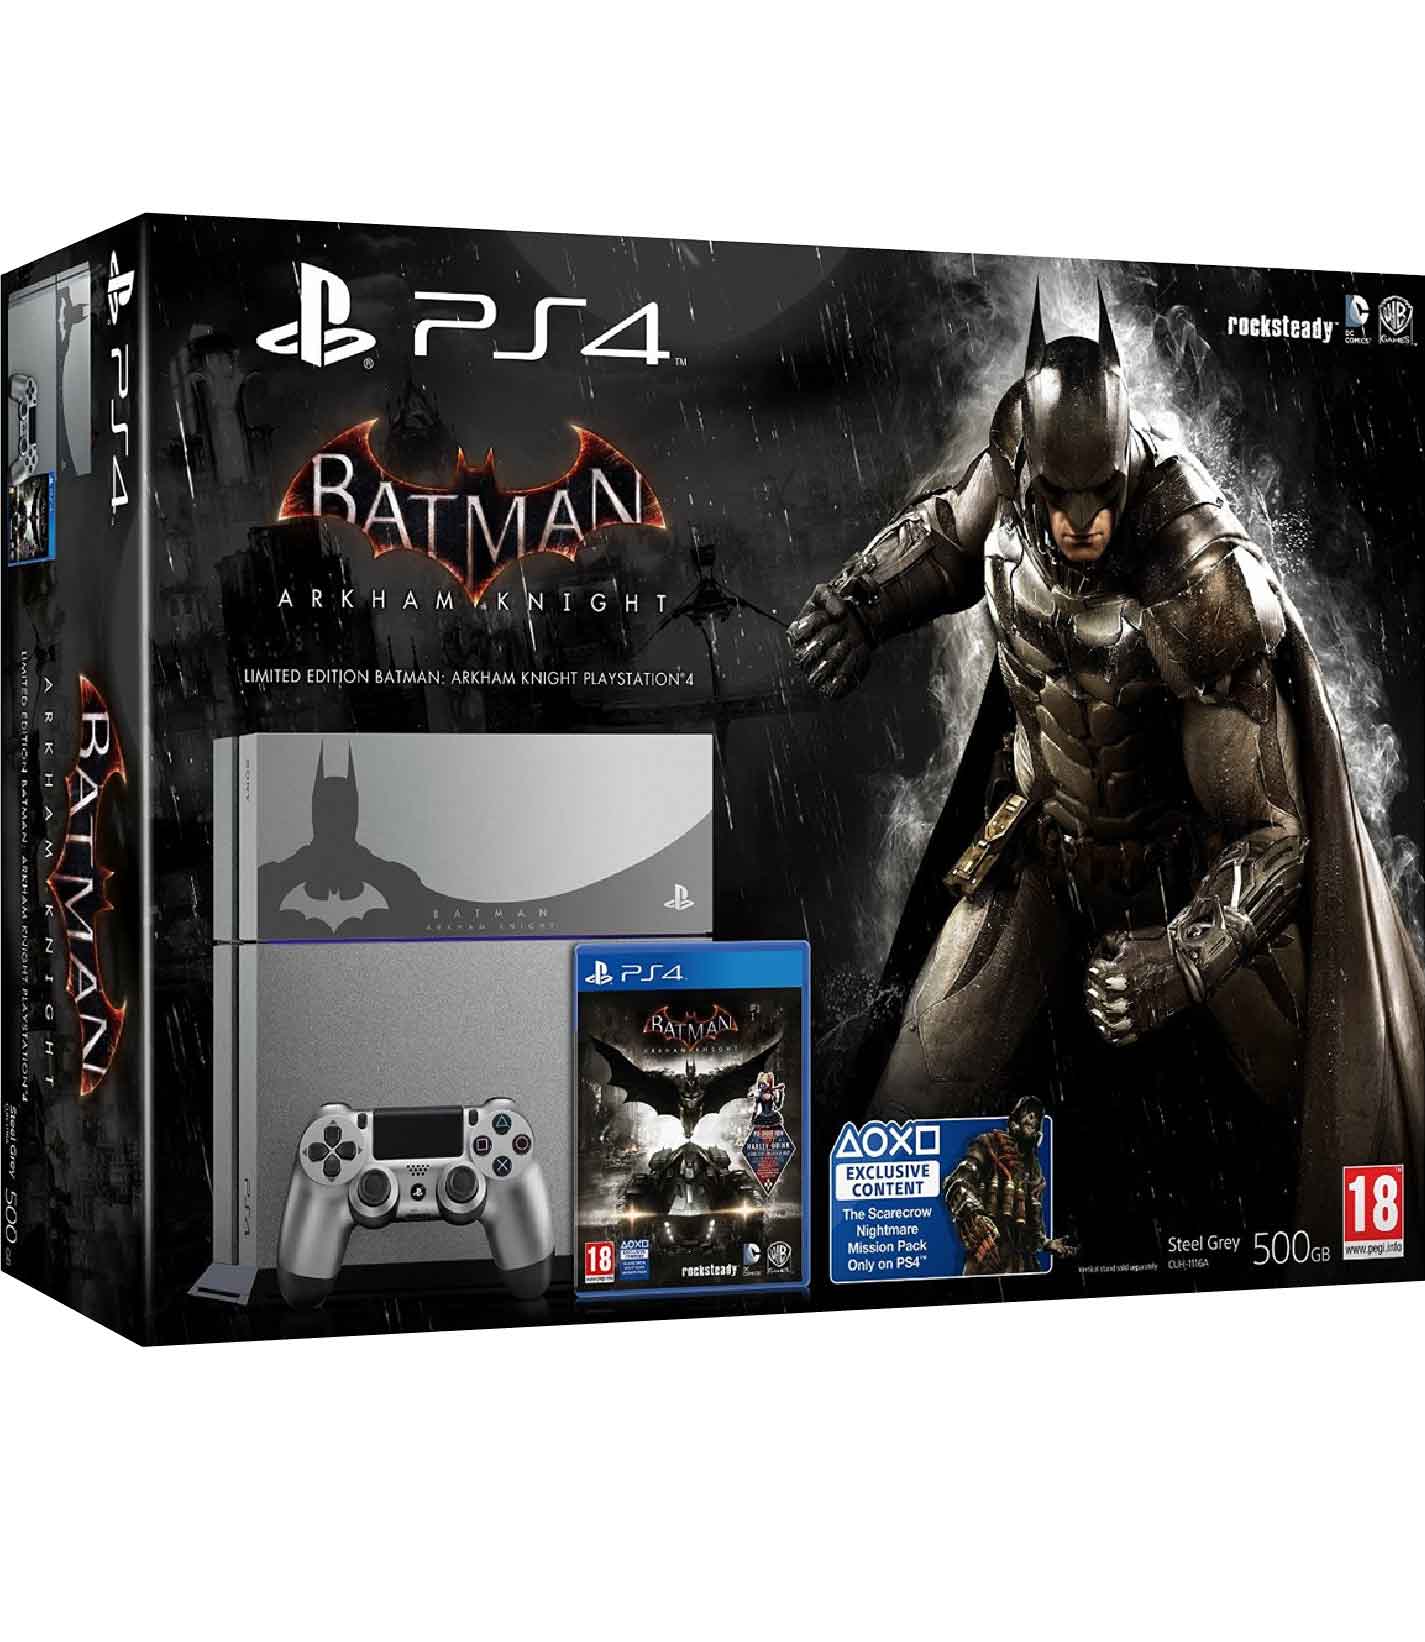 Limited edition 'Batman' PlayStation 4 scratches that superhero itch